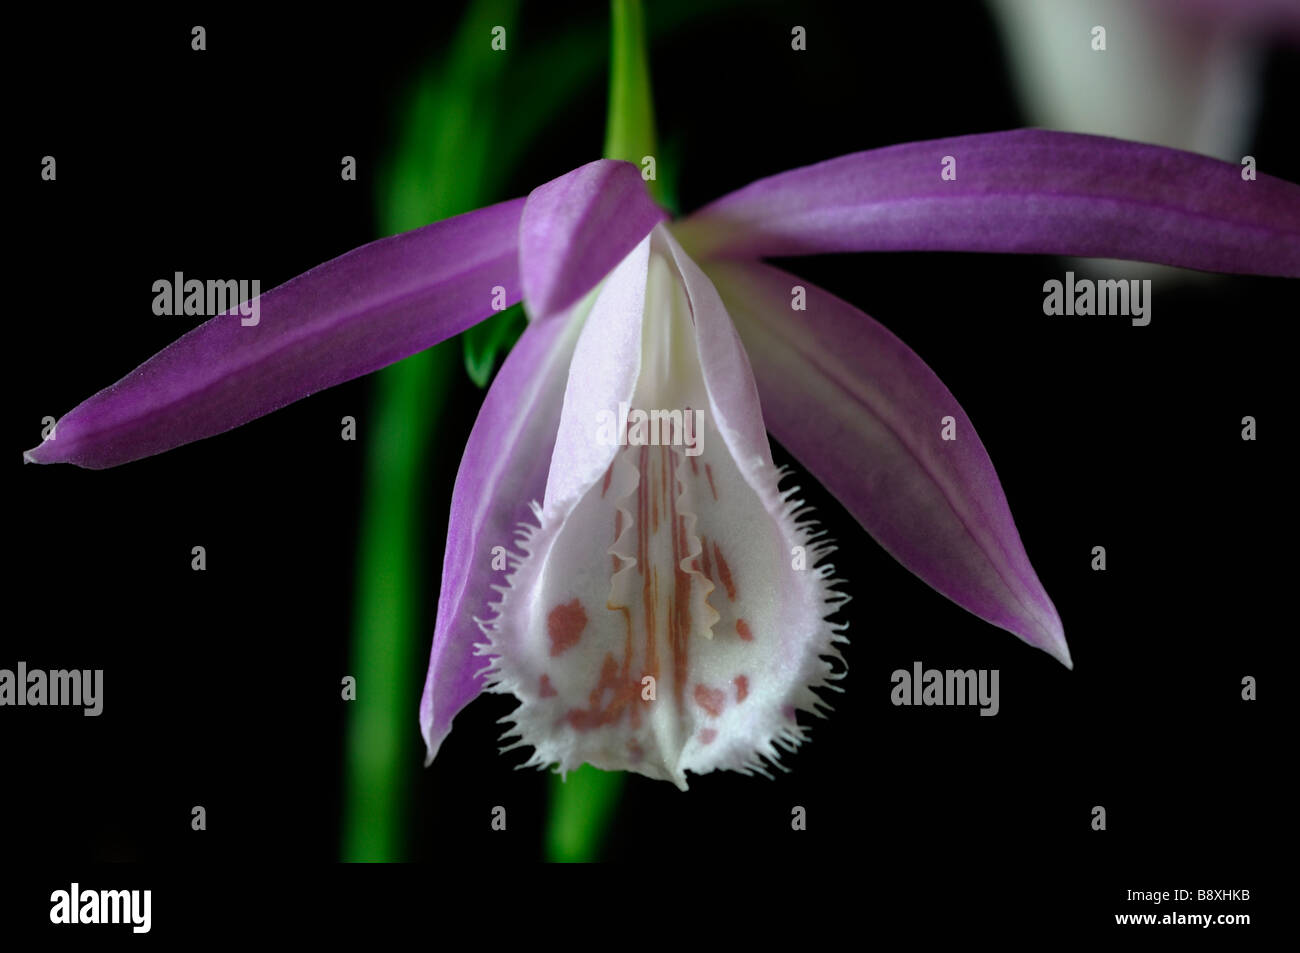 Pleione formosana windowsill orchid flower plant pink purple white set contrast contrasted against a black dark background Stock Photo